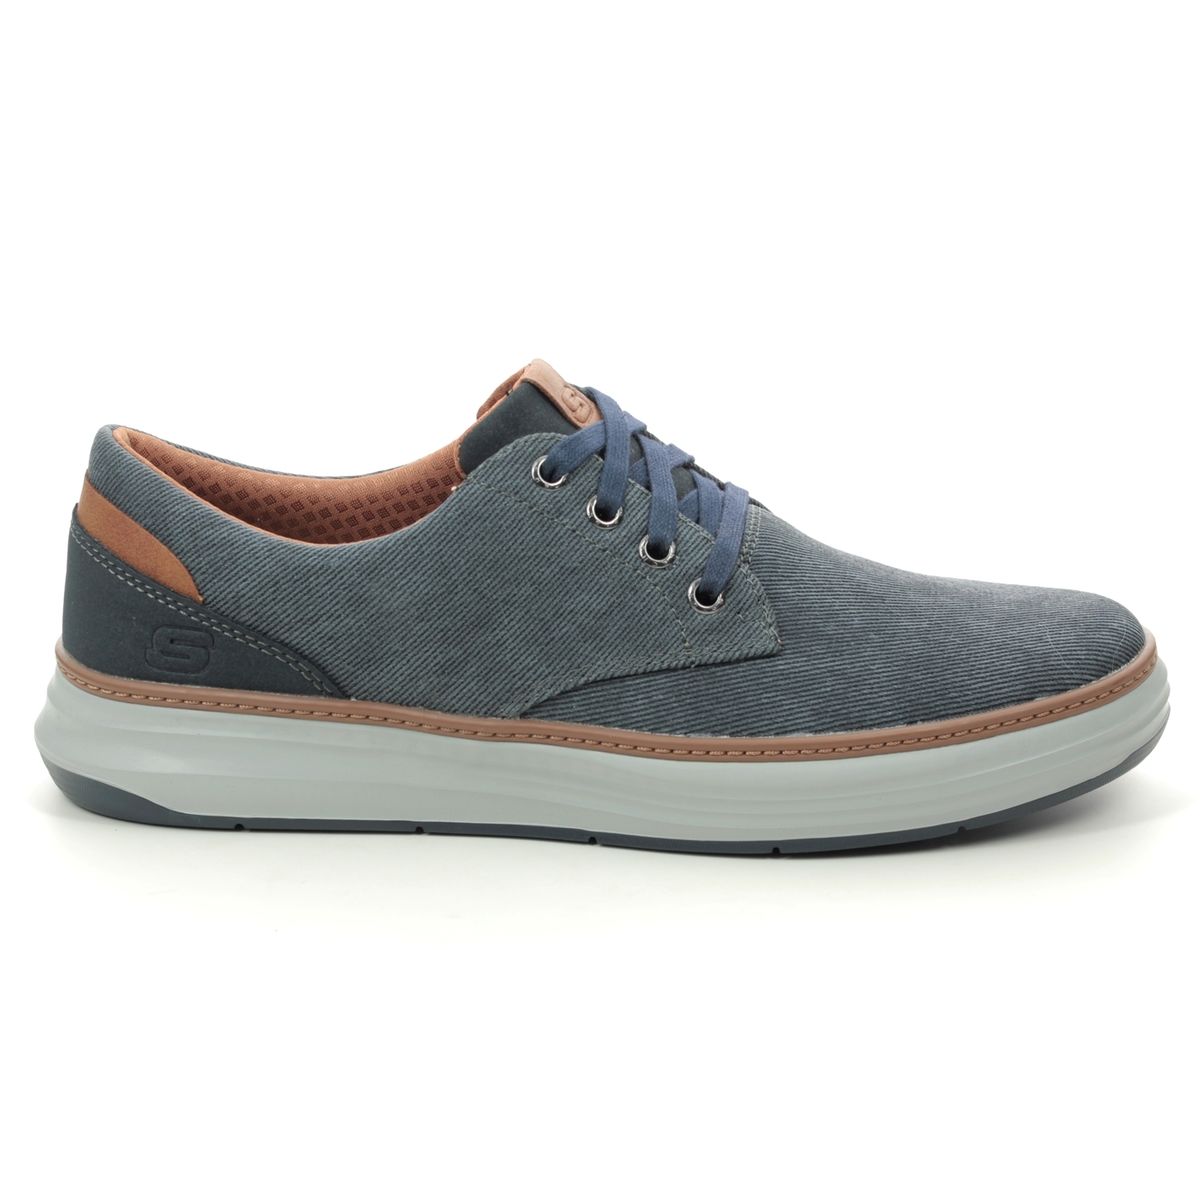 Skechers Moreno Ederson 65981 NVY Navy casual shoes